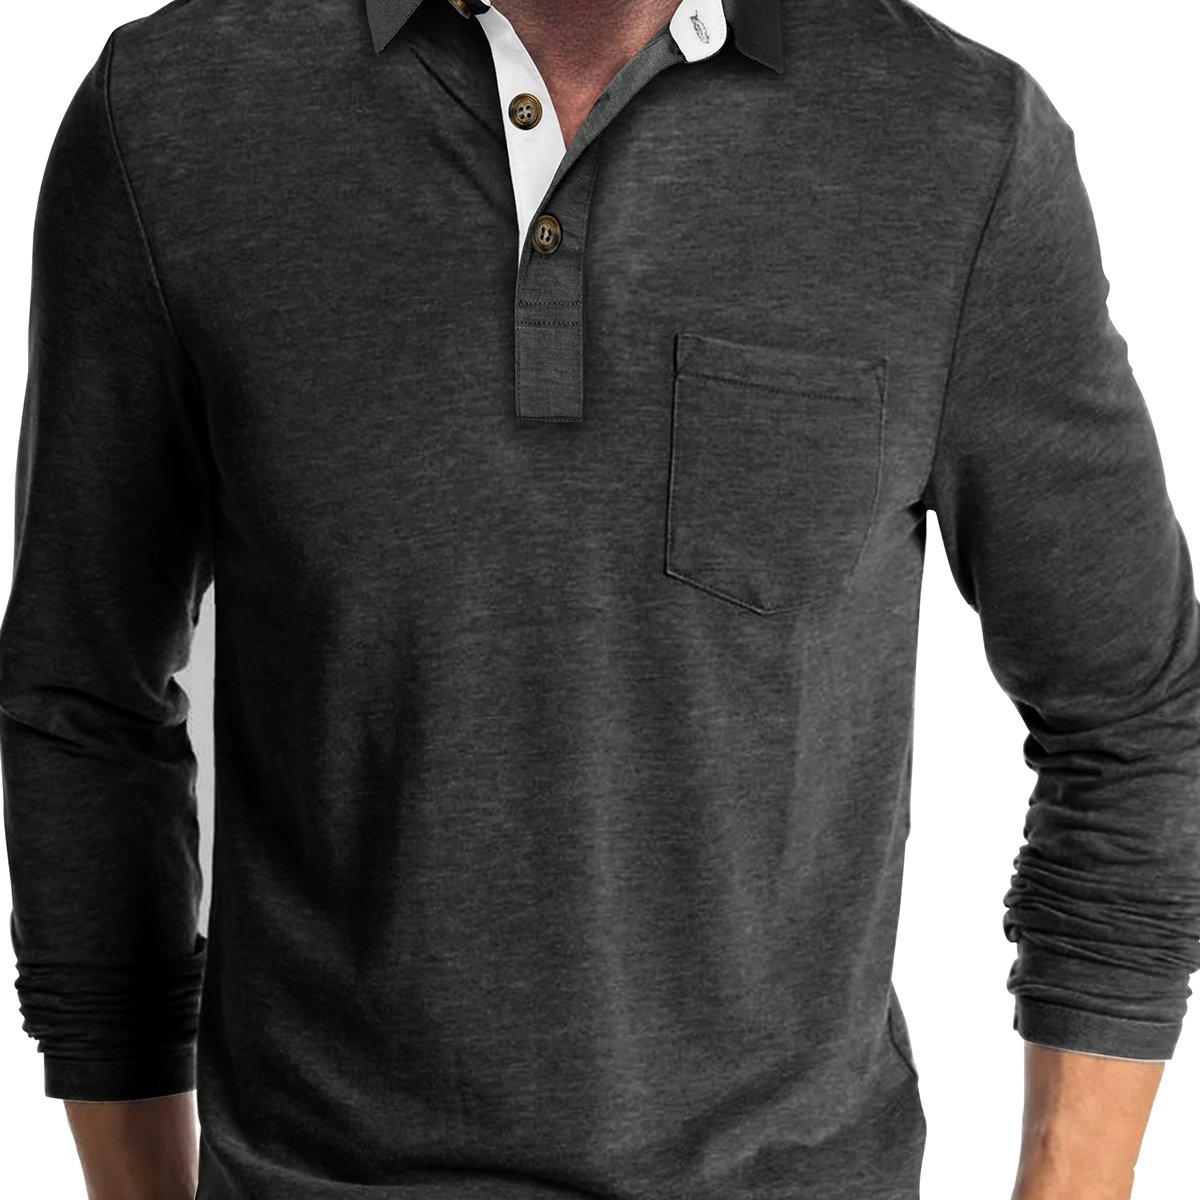 Men's Golf Solid Color Long Sleeve Lapel Casual Polo Shirt